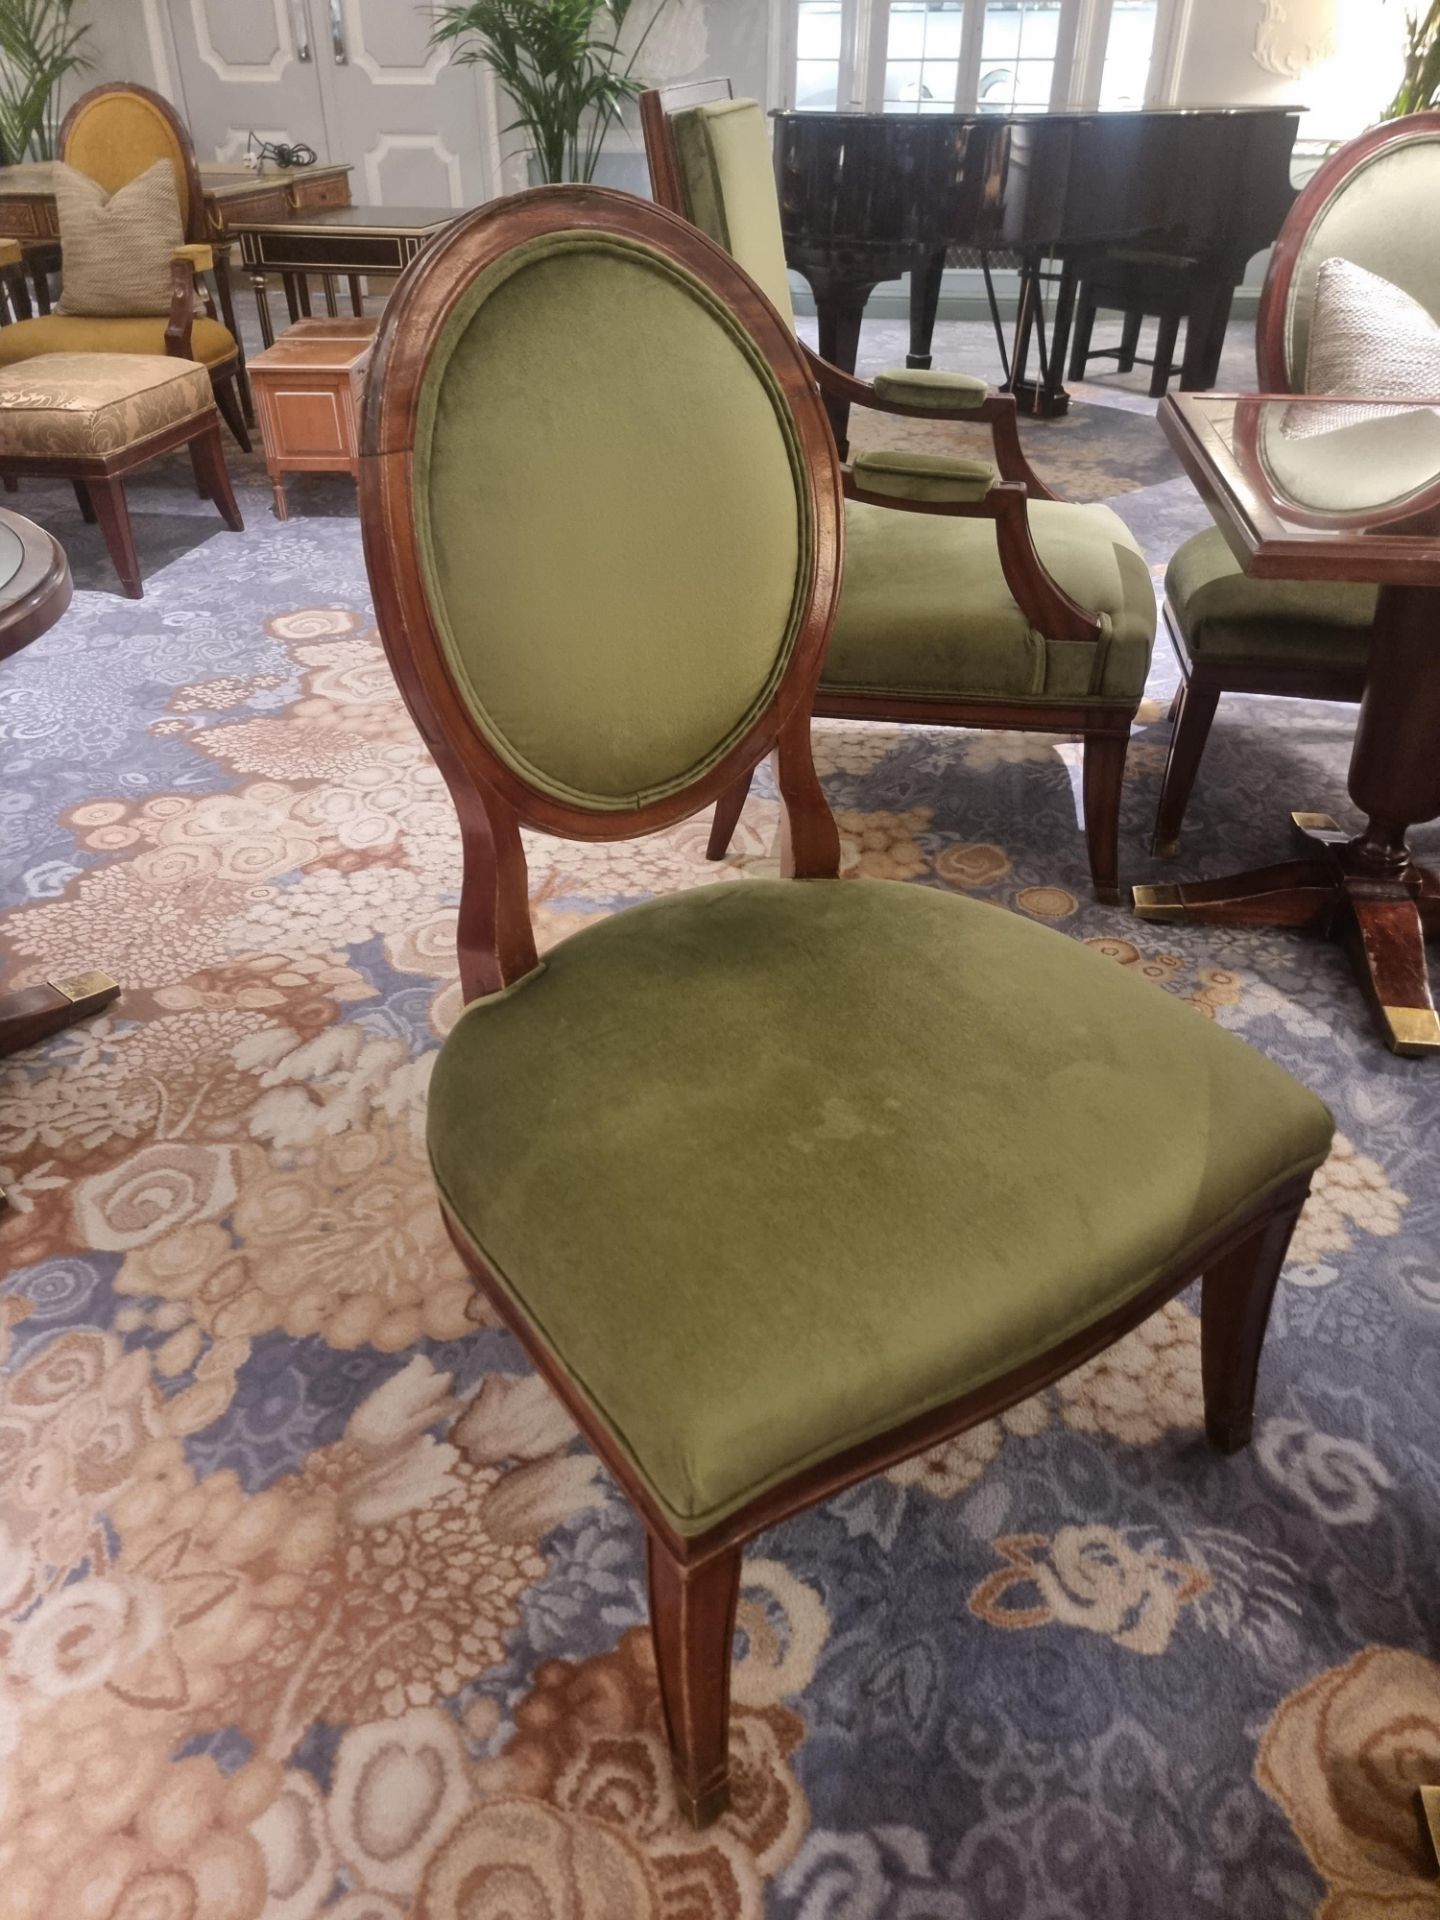 Louis XVI Style Framed And Upholstered Arm Chair In Lelievre Paris Olive Green Salon Chair 68 x 68 x - Image 4 of 5